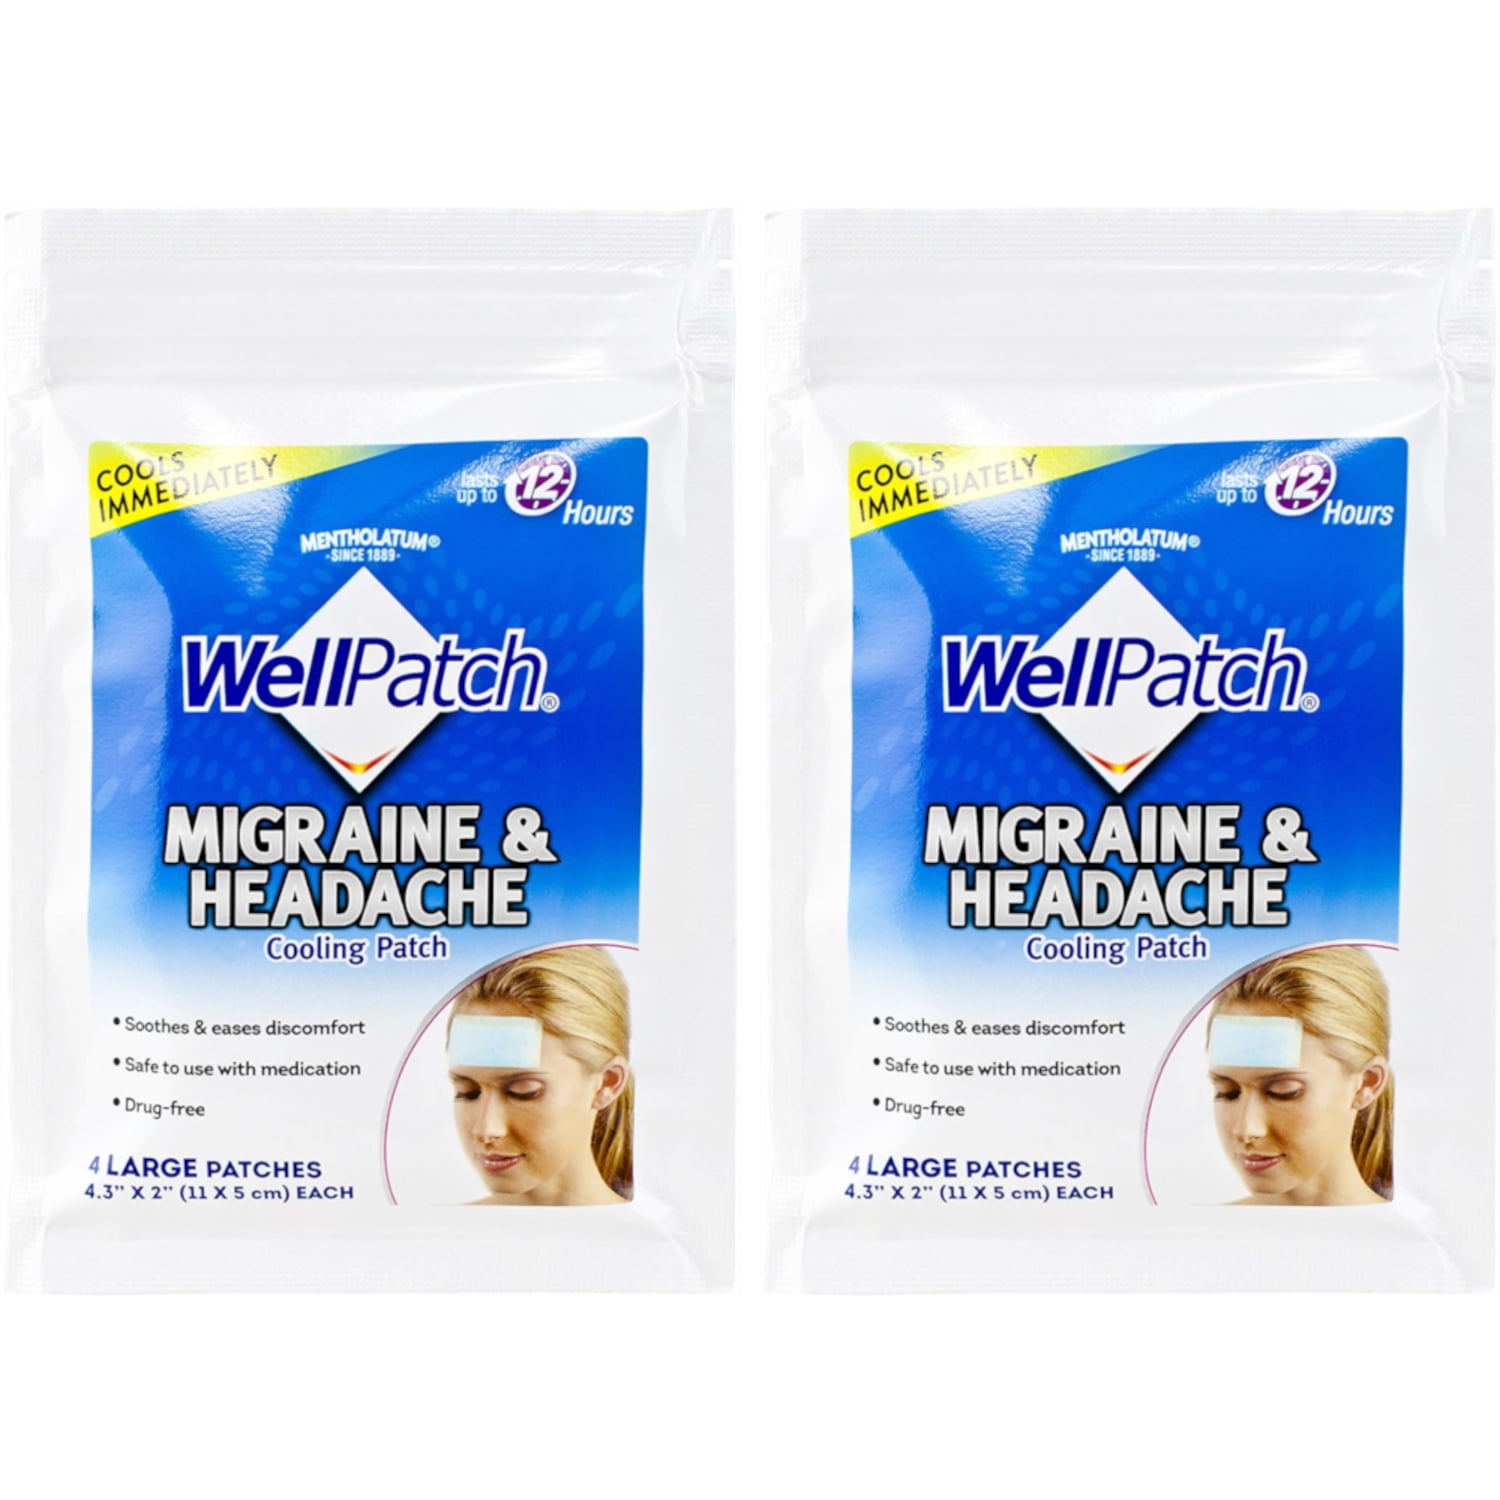 WellPatch Migraine & Headache Cooling Patch - Drug Free, Lasts Up